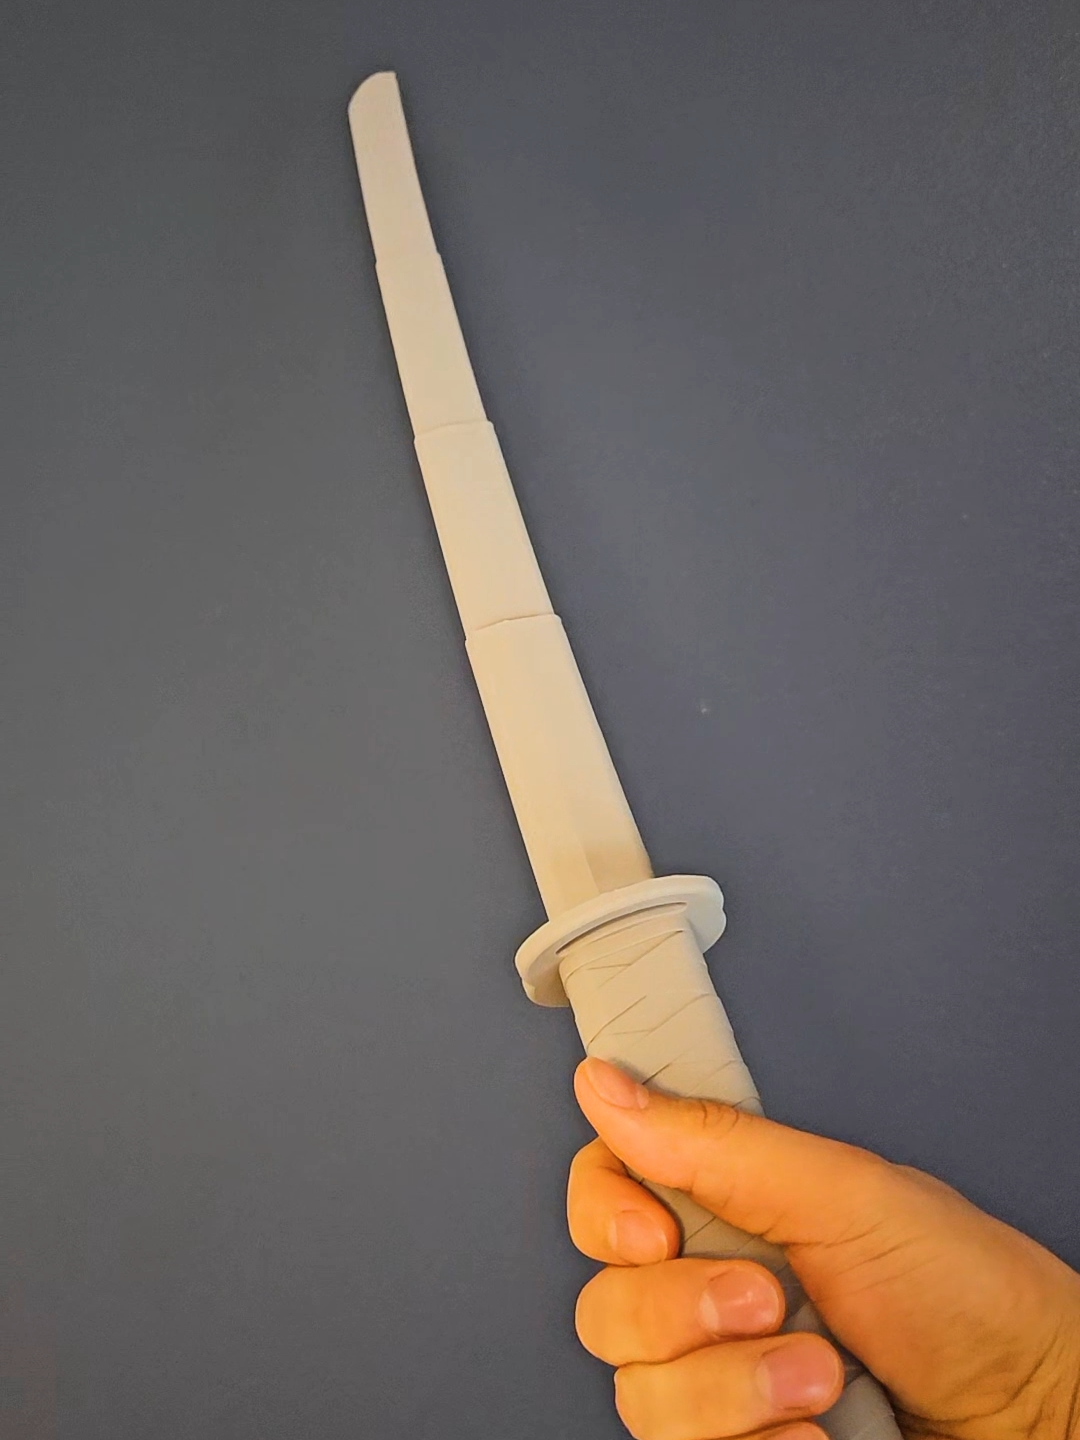 3D printed Collapsing Katana 3D model / STL File used in this video found here: https://makerworld.com/en/models/114630#profileId-123241 The filament used for this print is PLA Basic Gray by Bambu Lab. My 3D prints are made with Bambu Lab A1 mini. #3dprinting #3dprint #3d #3dprinted #bambulab #bambulabs #satisfying #asmr #timelapse #katana #sword #blade #samurai